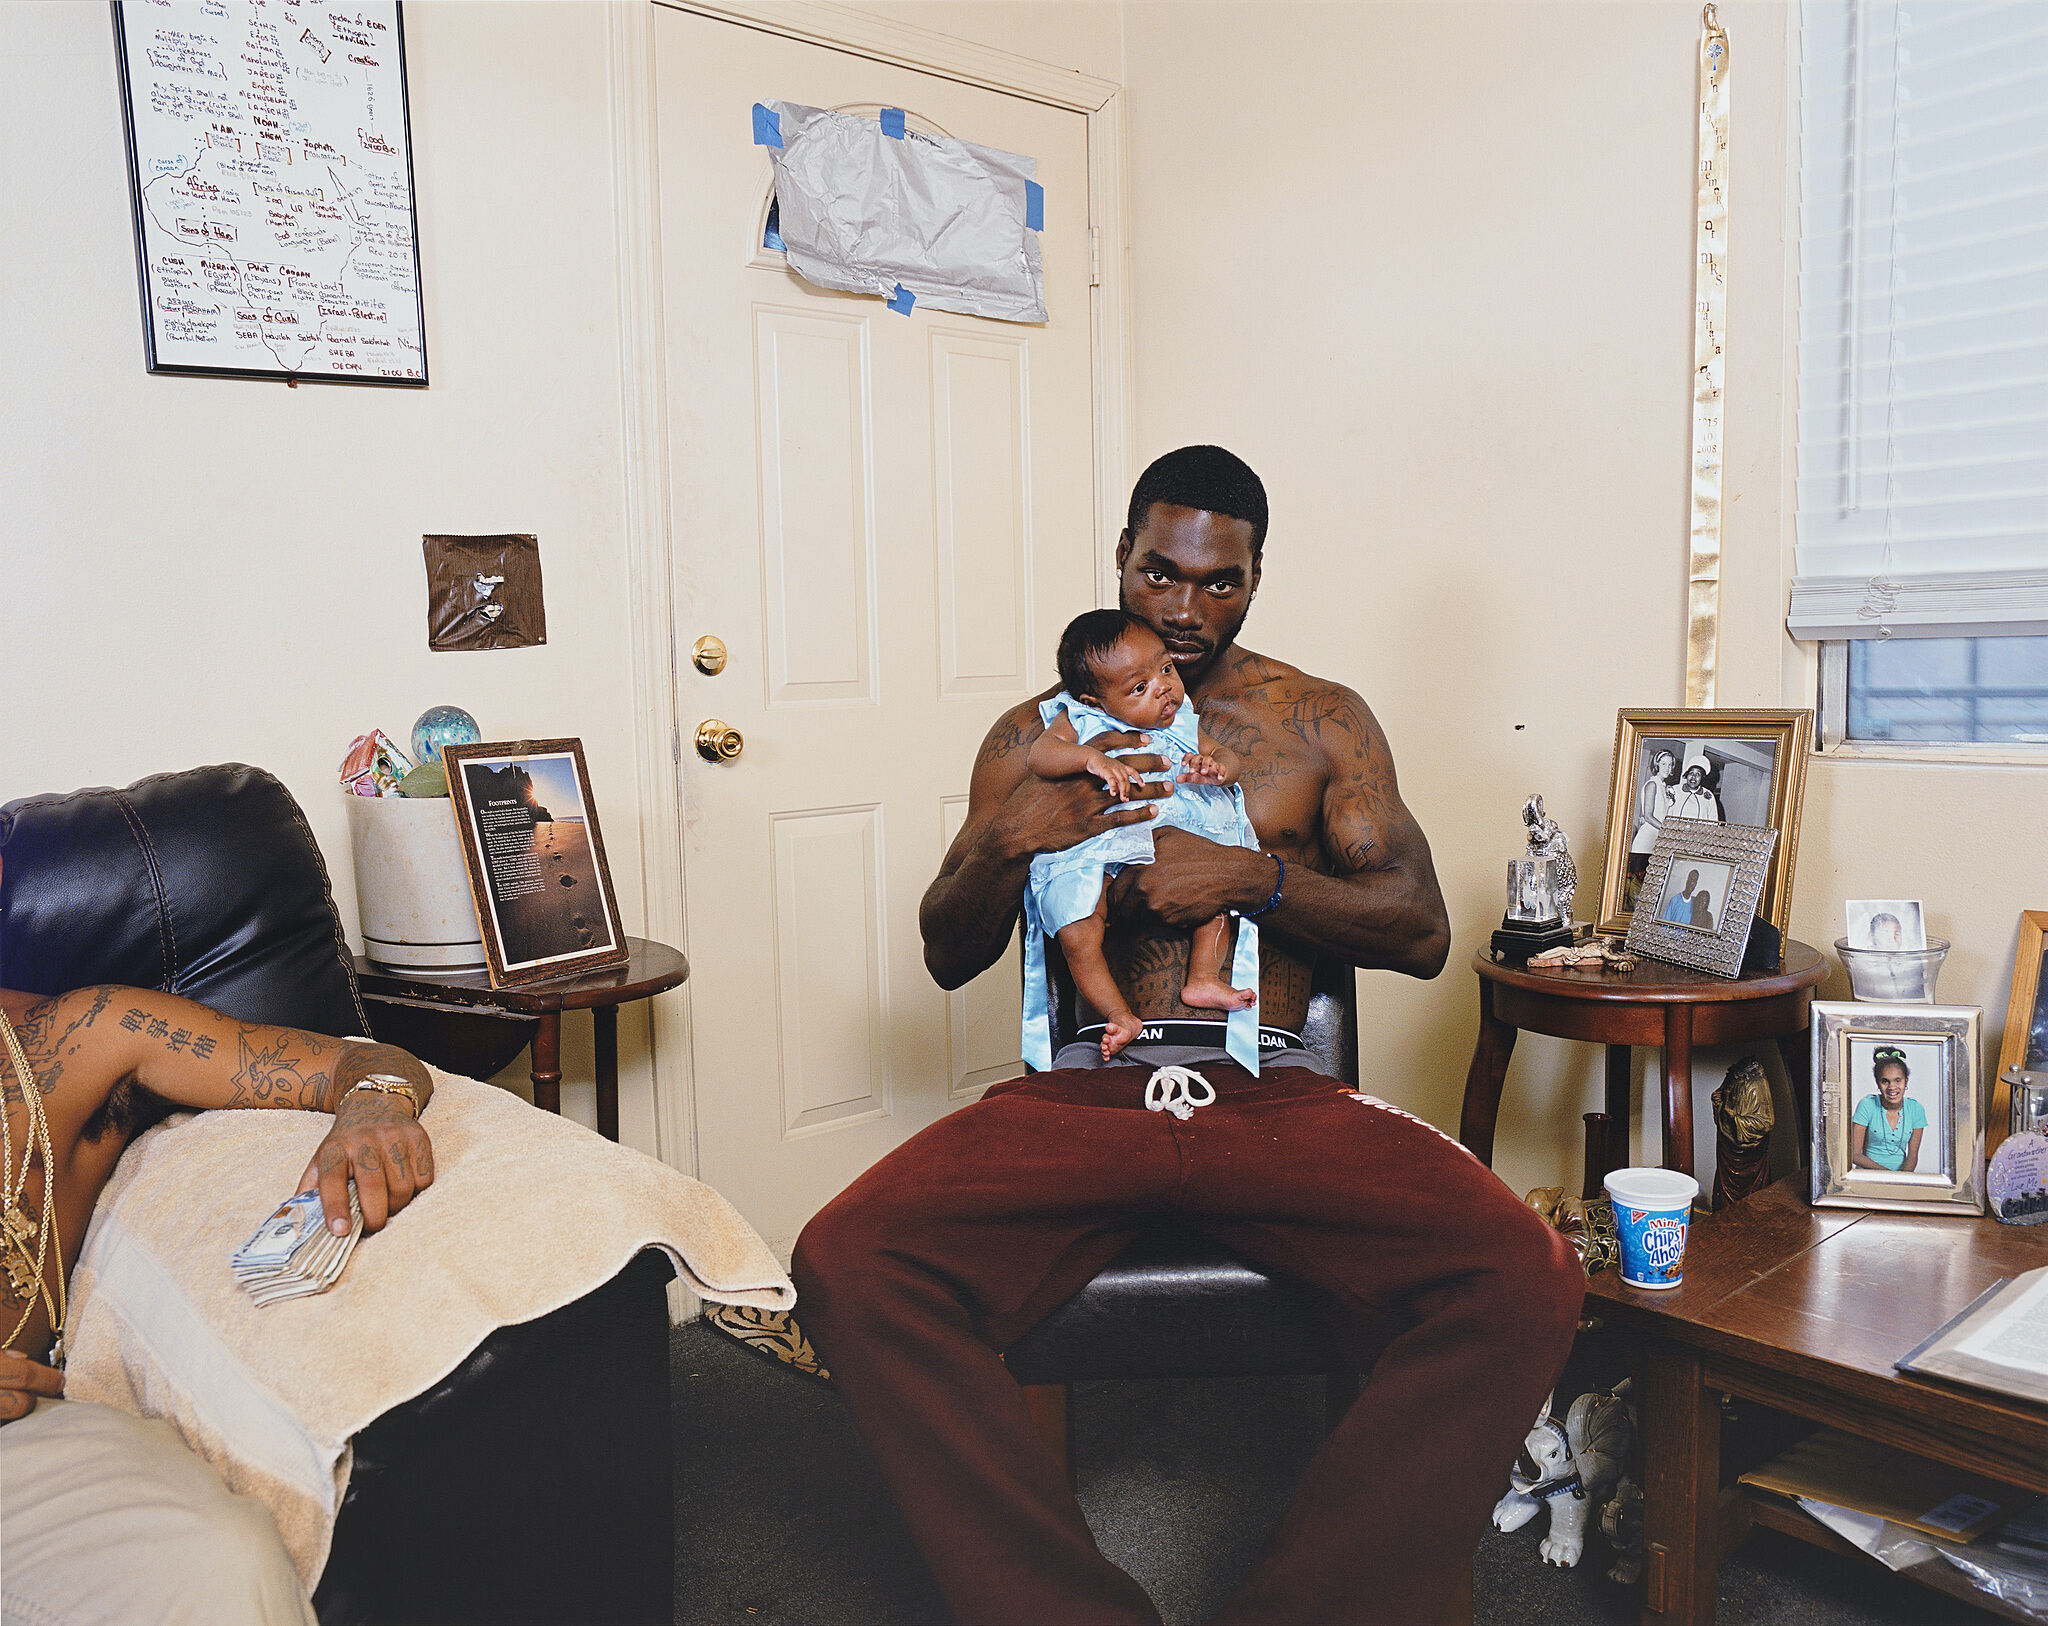 A photograph of a person sitting in a chair holding a baby in a house.